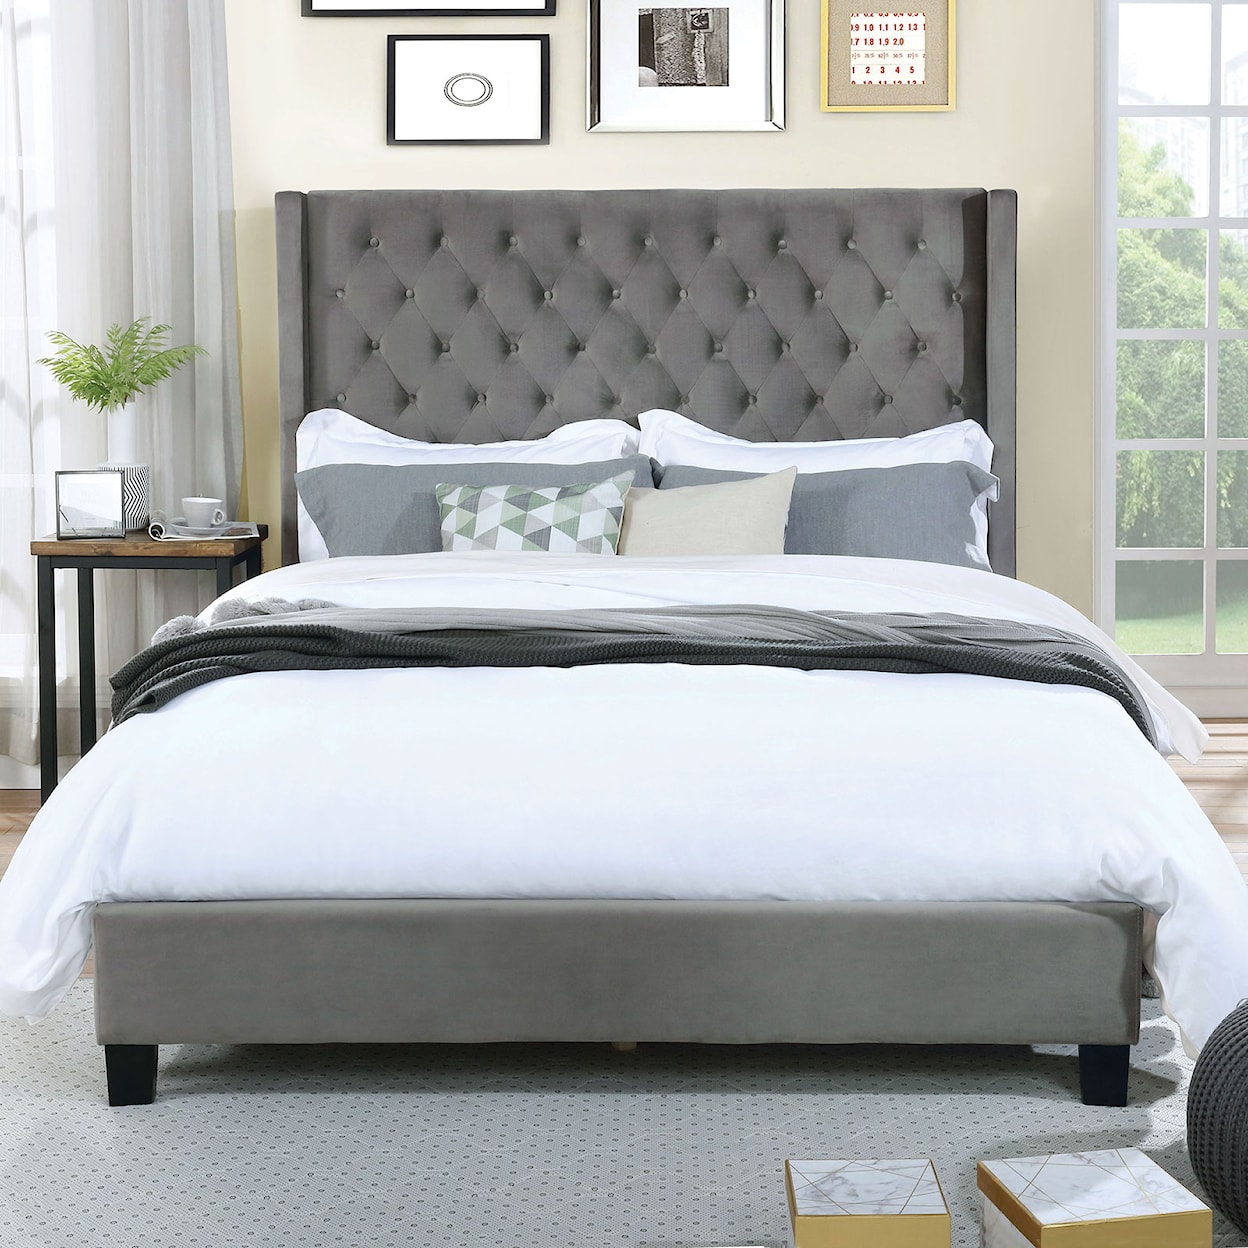 Furniture of America Ryleigh Queen Bed